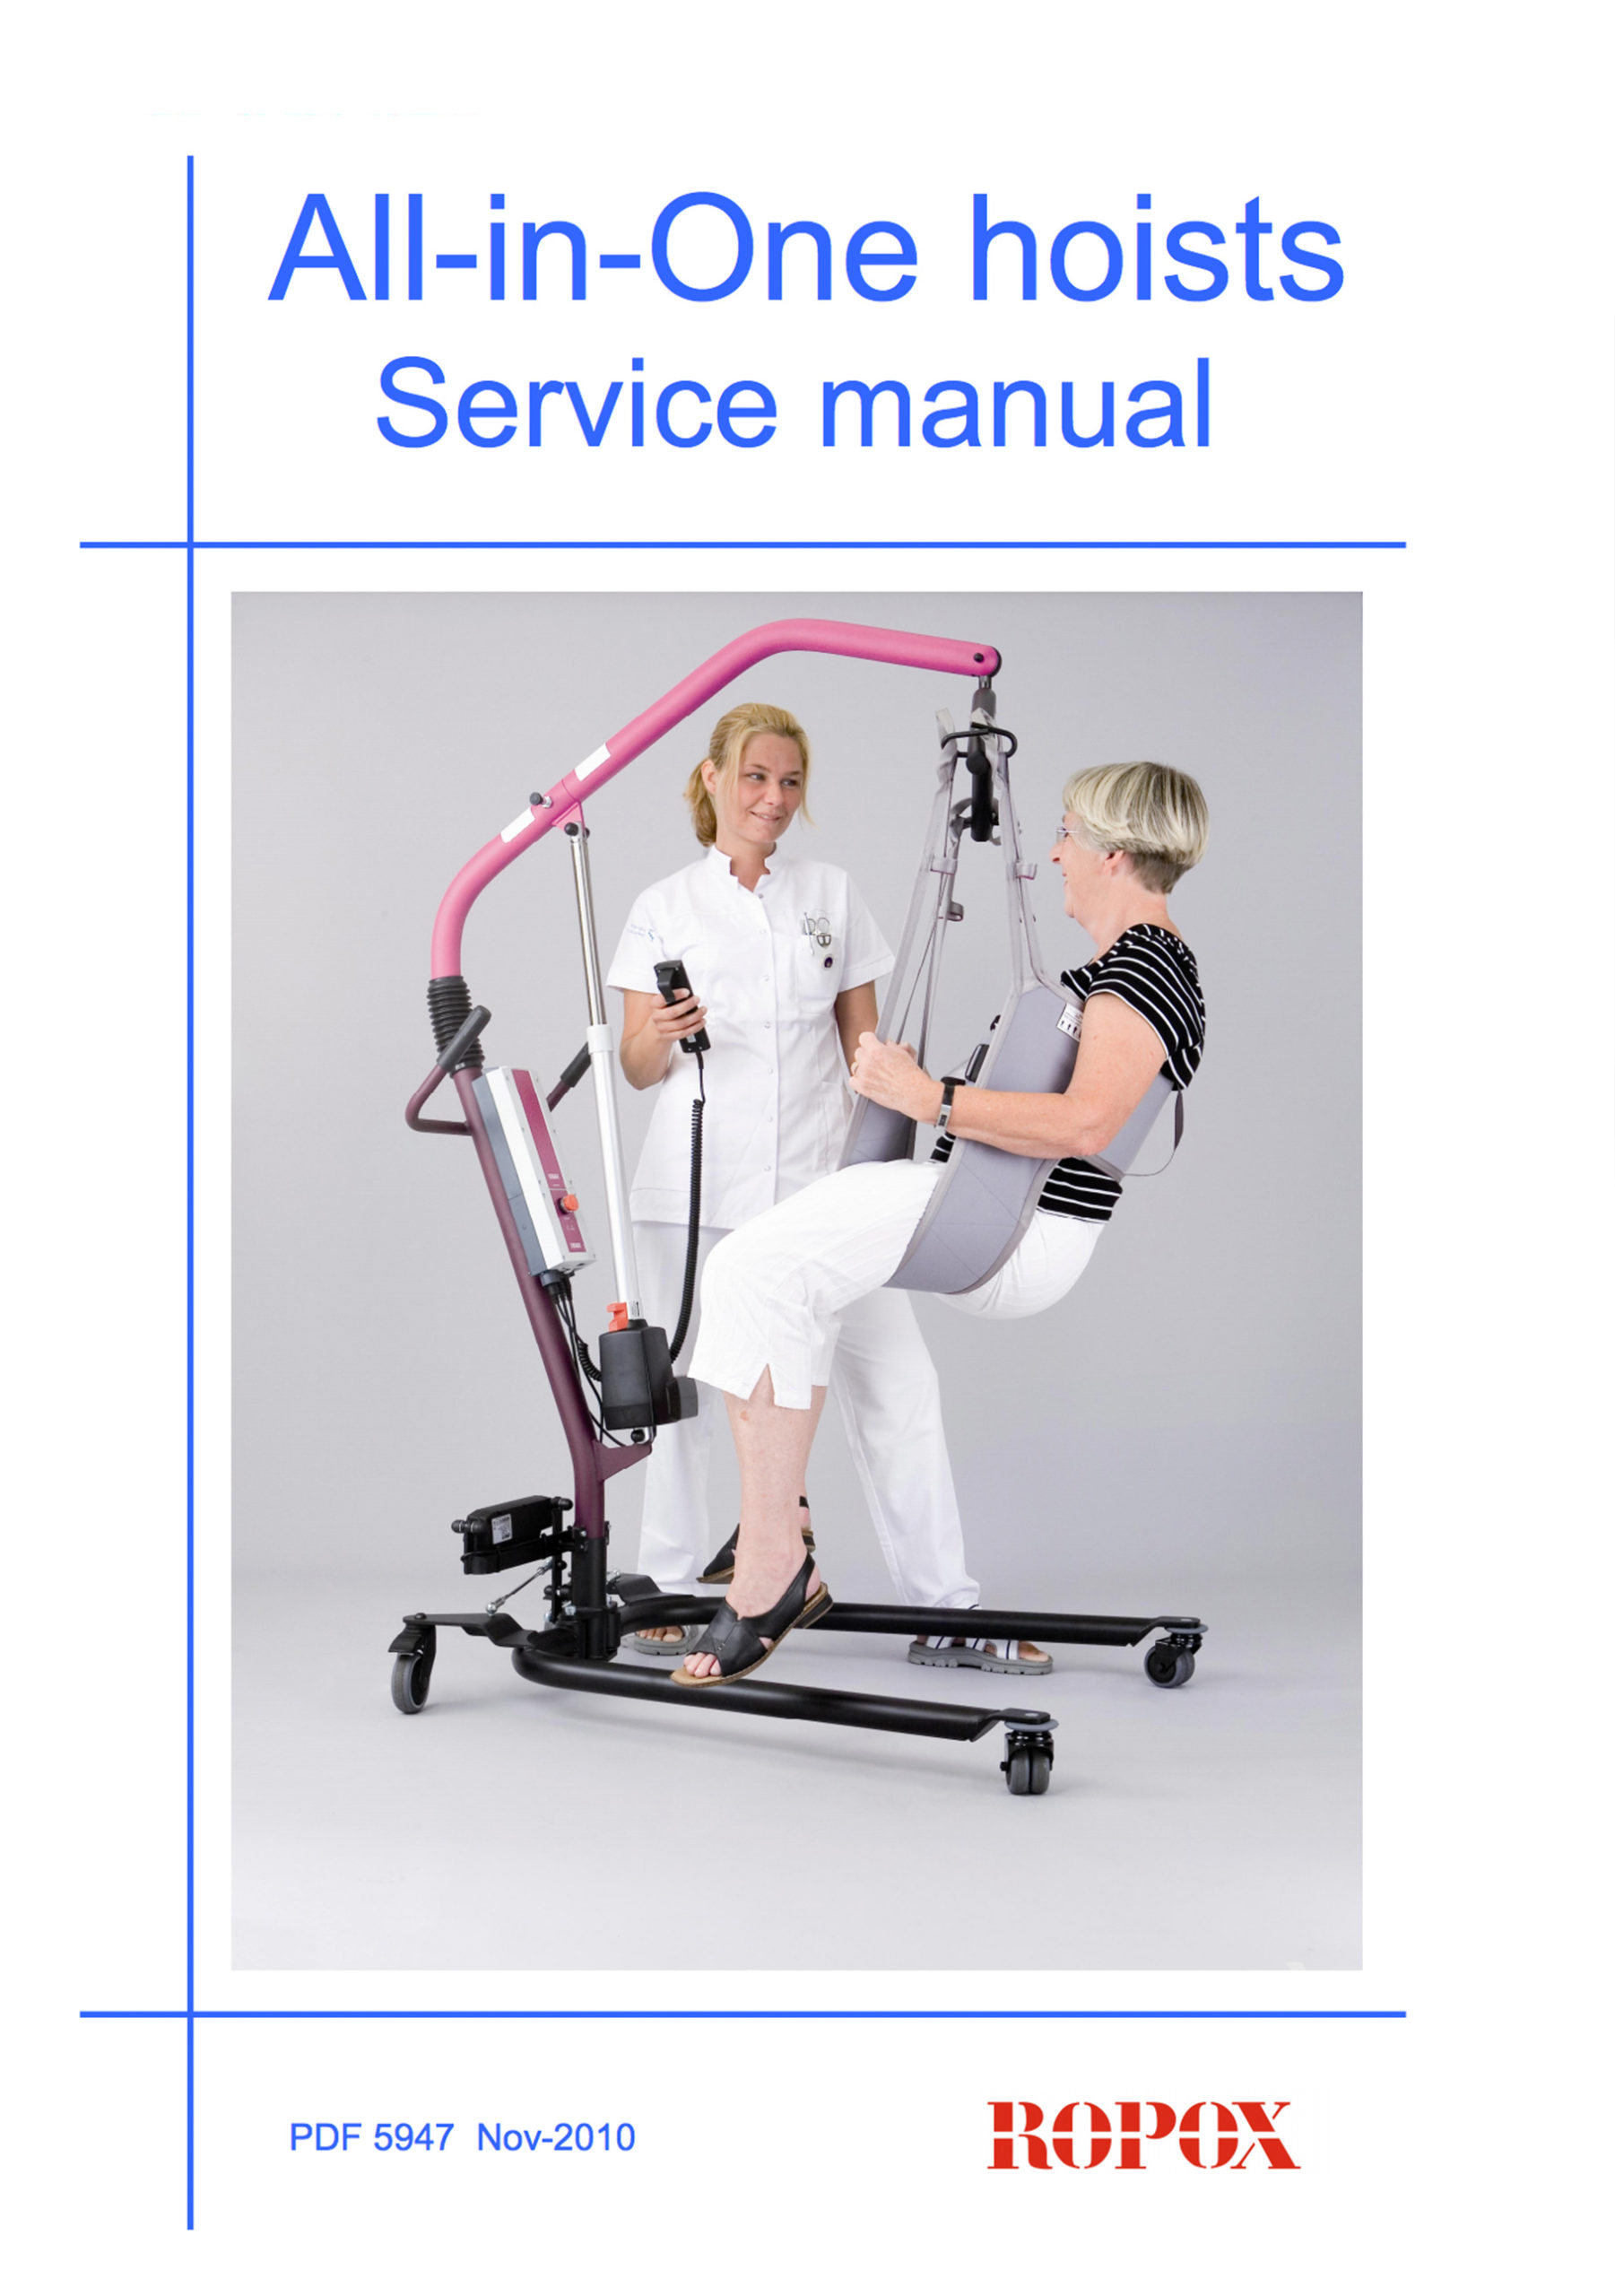 Service manual All-in-One hoists